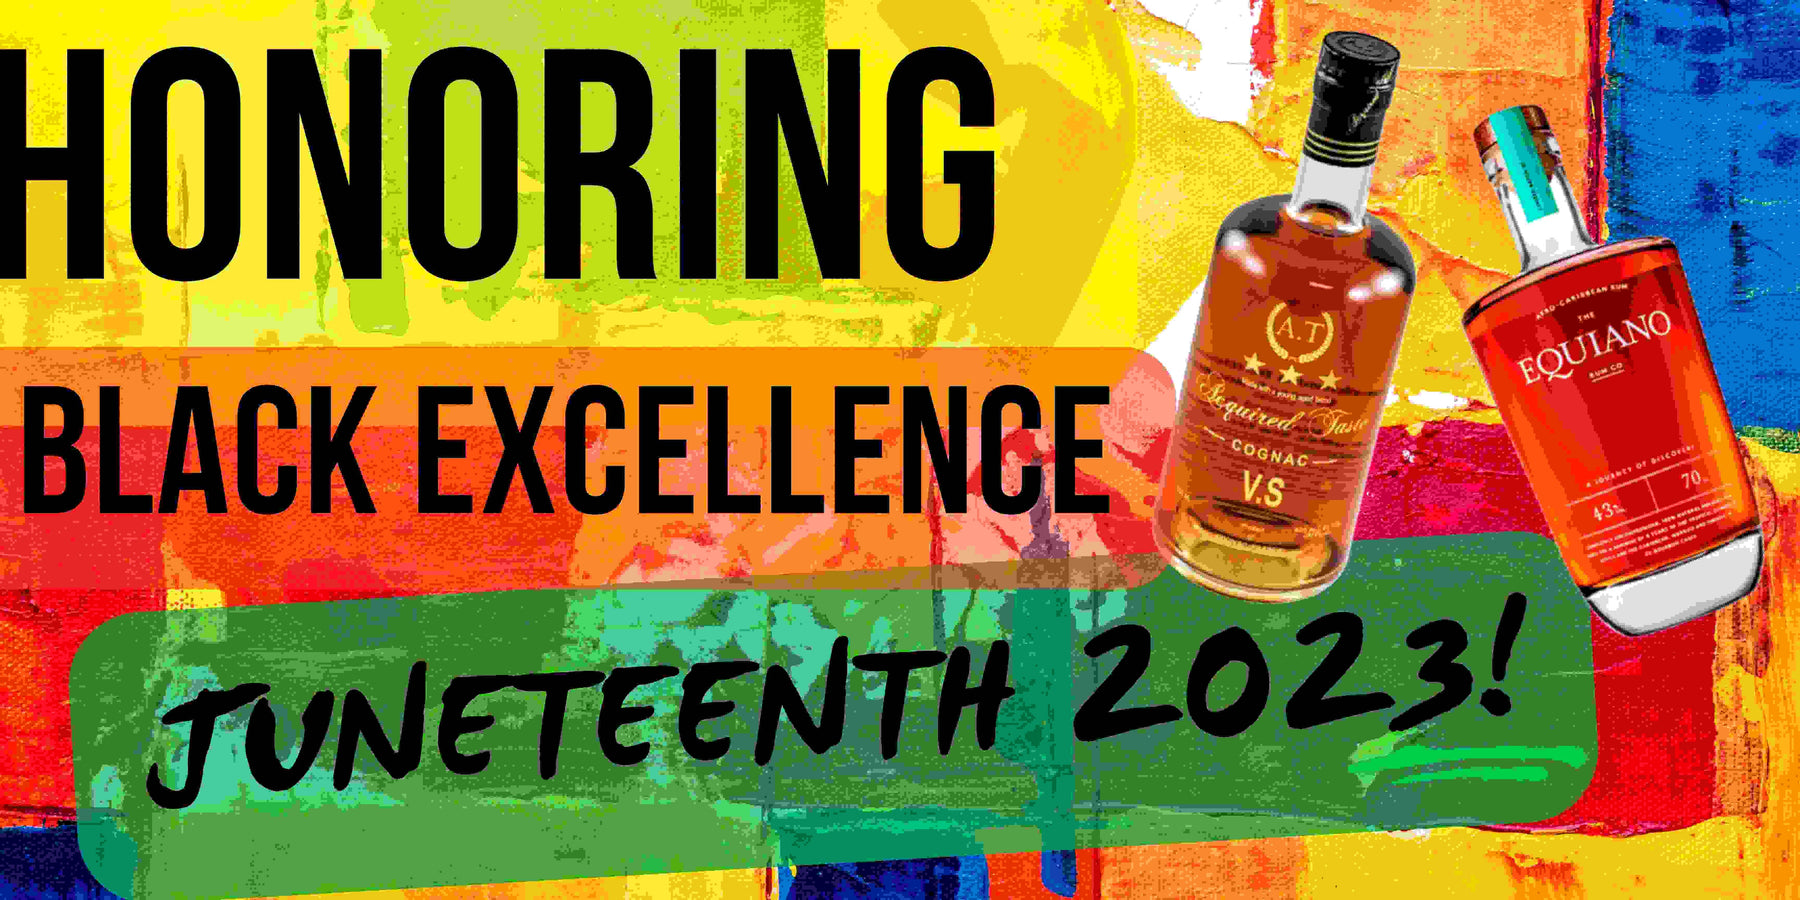 Our Top 2 Craft Black-Owned Spirit Brand Picks Juneteenth 2023